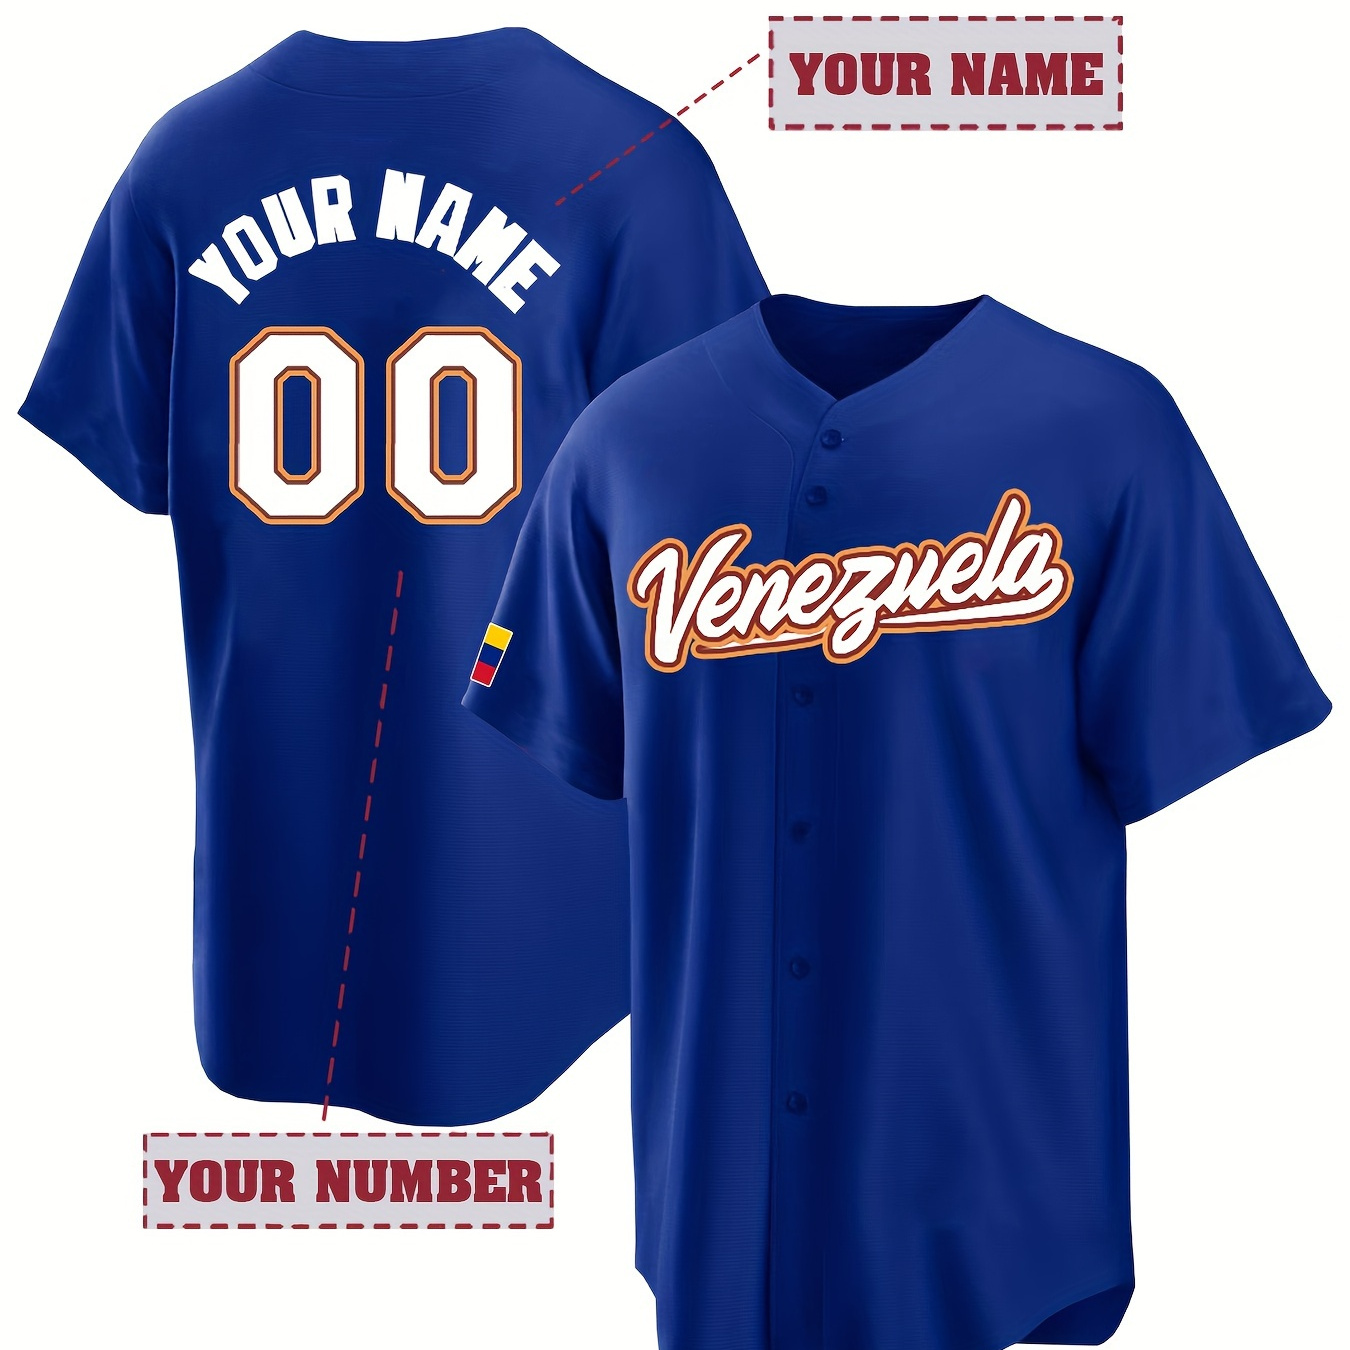 

Customized Name And Number Design, Men's Venezuela Embroidery Design Short Sleeve Loose Breathable V-neck Baseball Jersey, Sports Shirt For Team Training